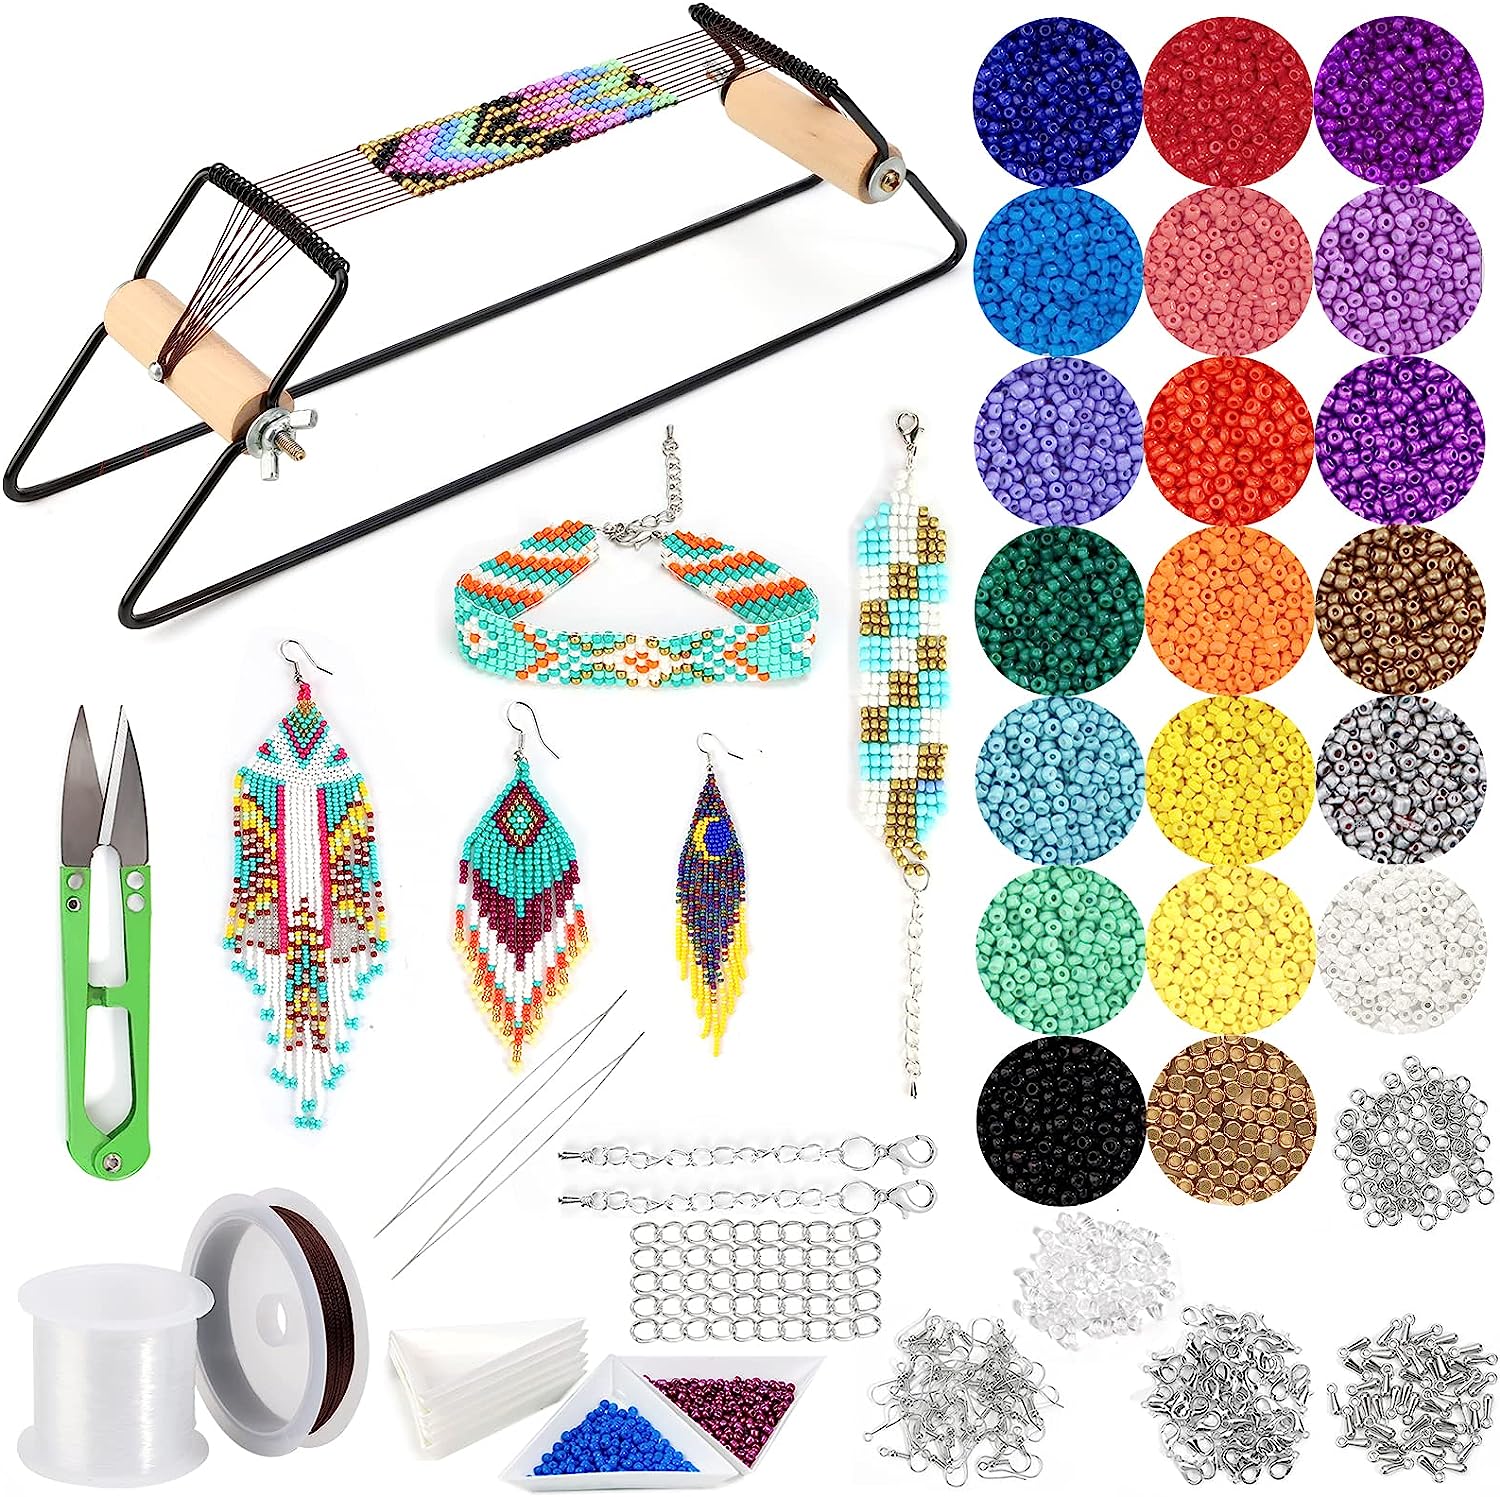 PP OPOUNT Bead Loom Kit, Loom Beading Supplies with [...]